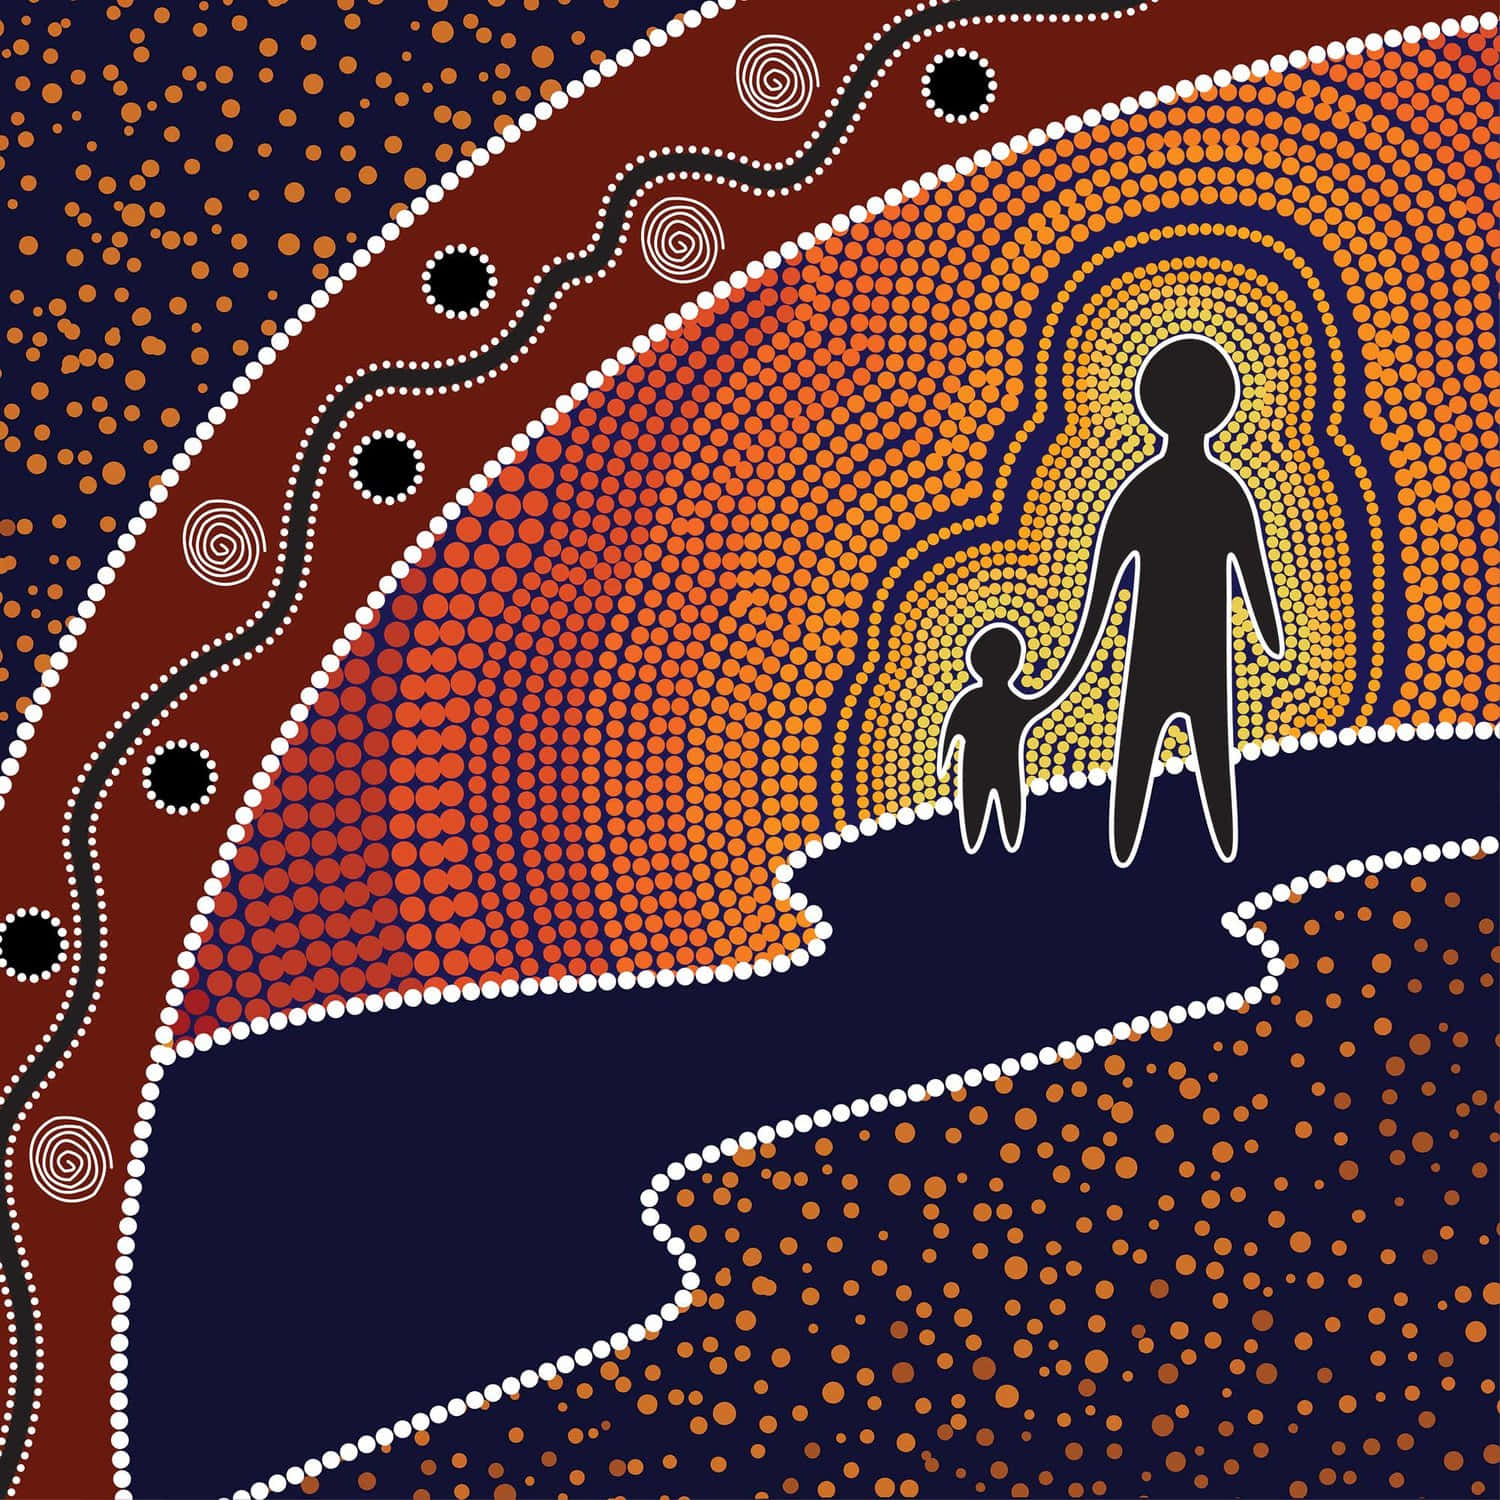 An Aboriginal Woman And Child Walking In The Desert